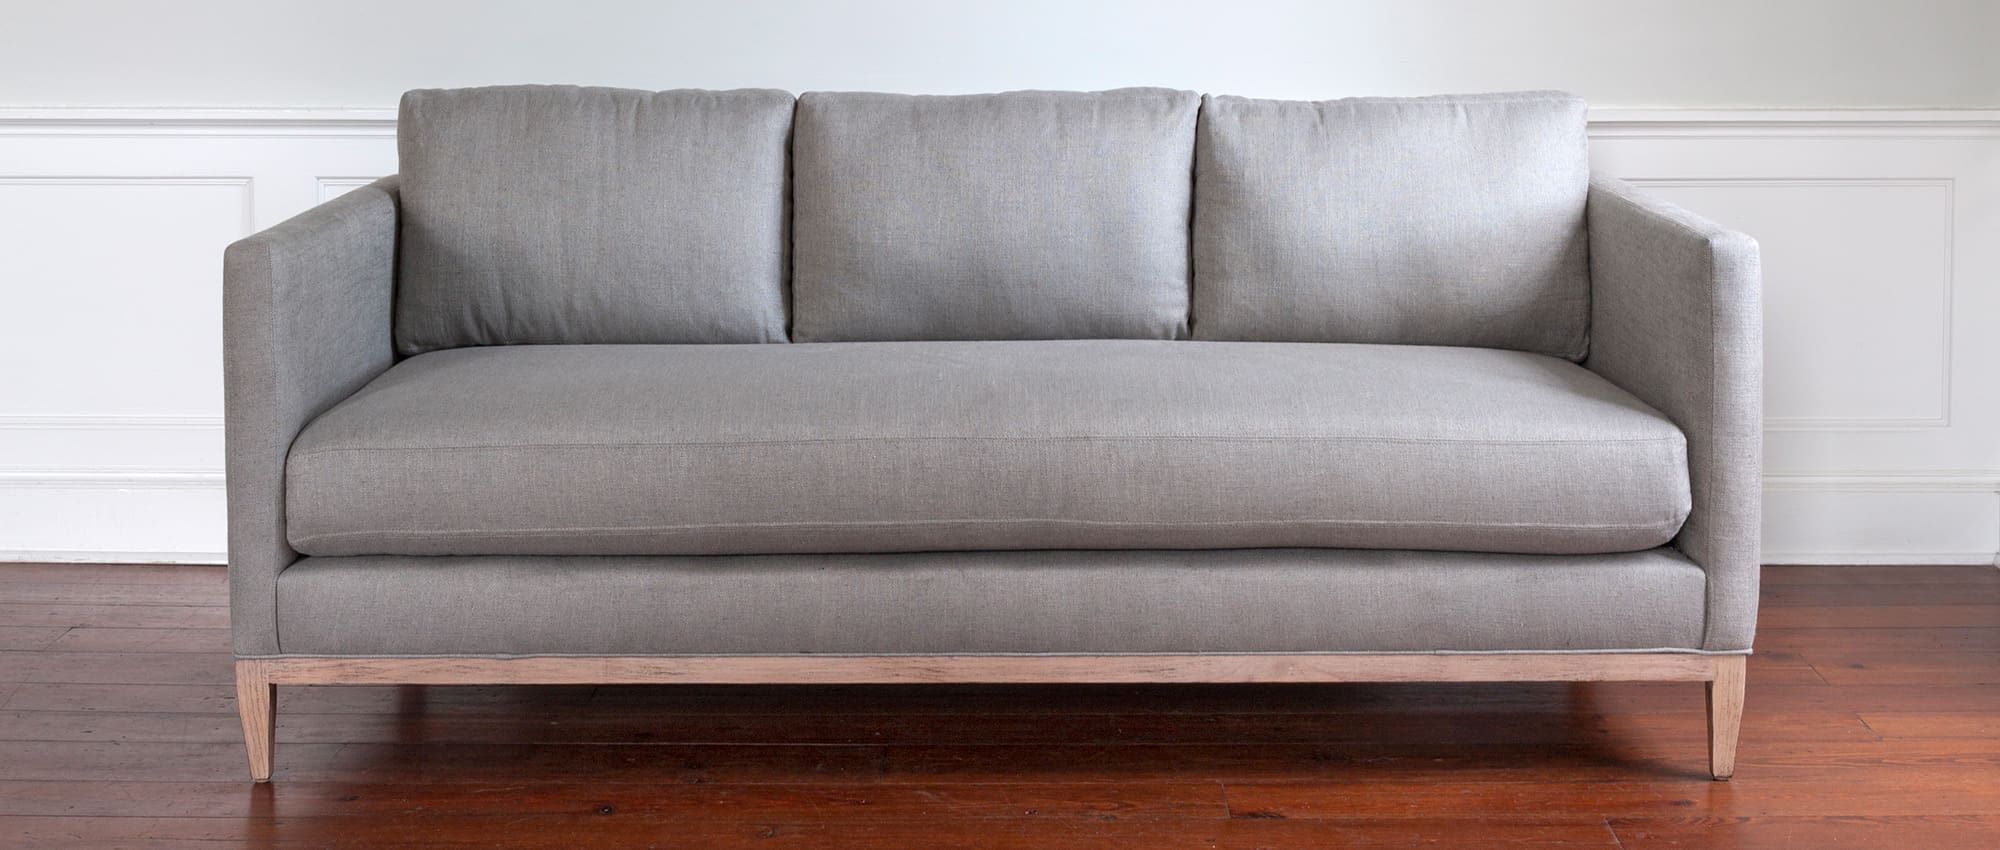 The Henry Sofa is pictured in medium grey, with an exposed wooden base, one long seat cushion, and three back cushions. Find it at GDC's Mount Pleasant furniture stores.